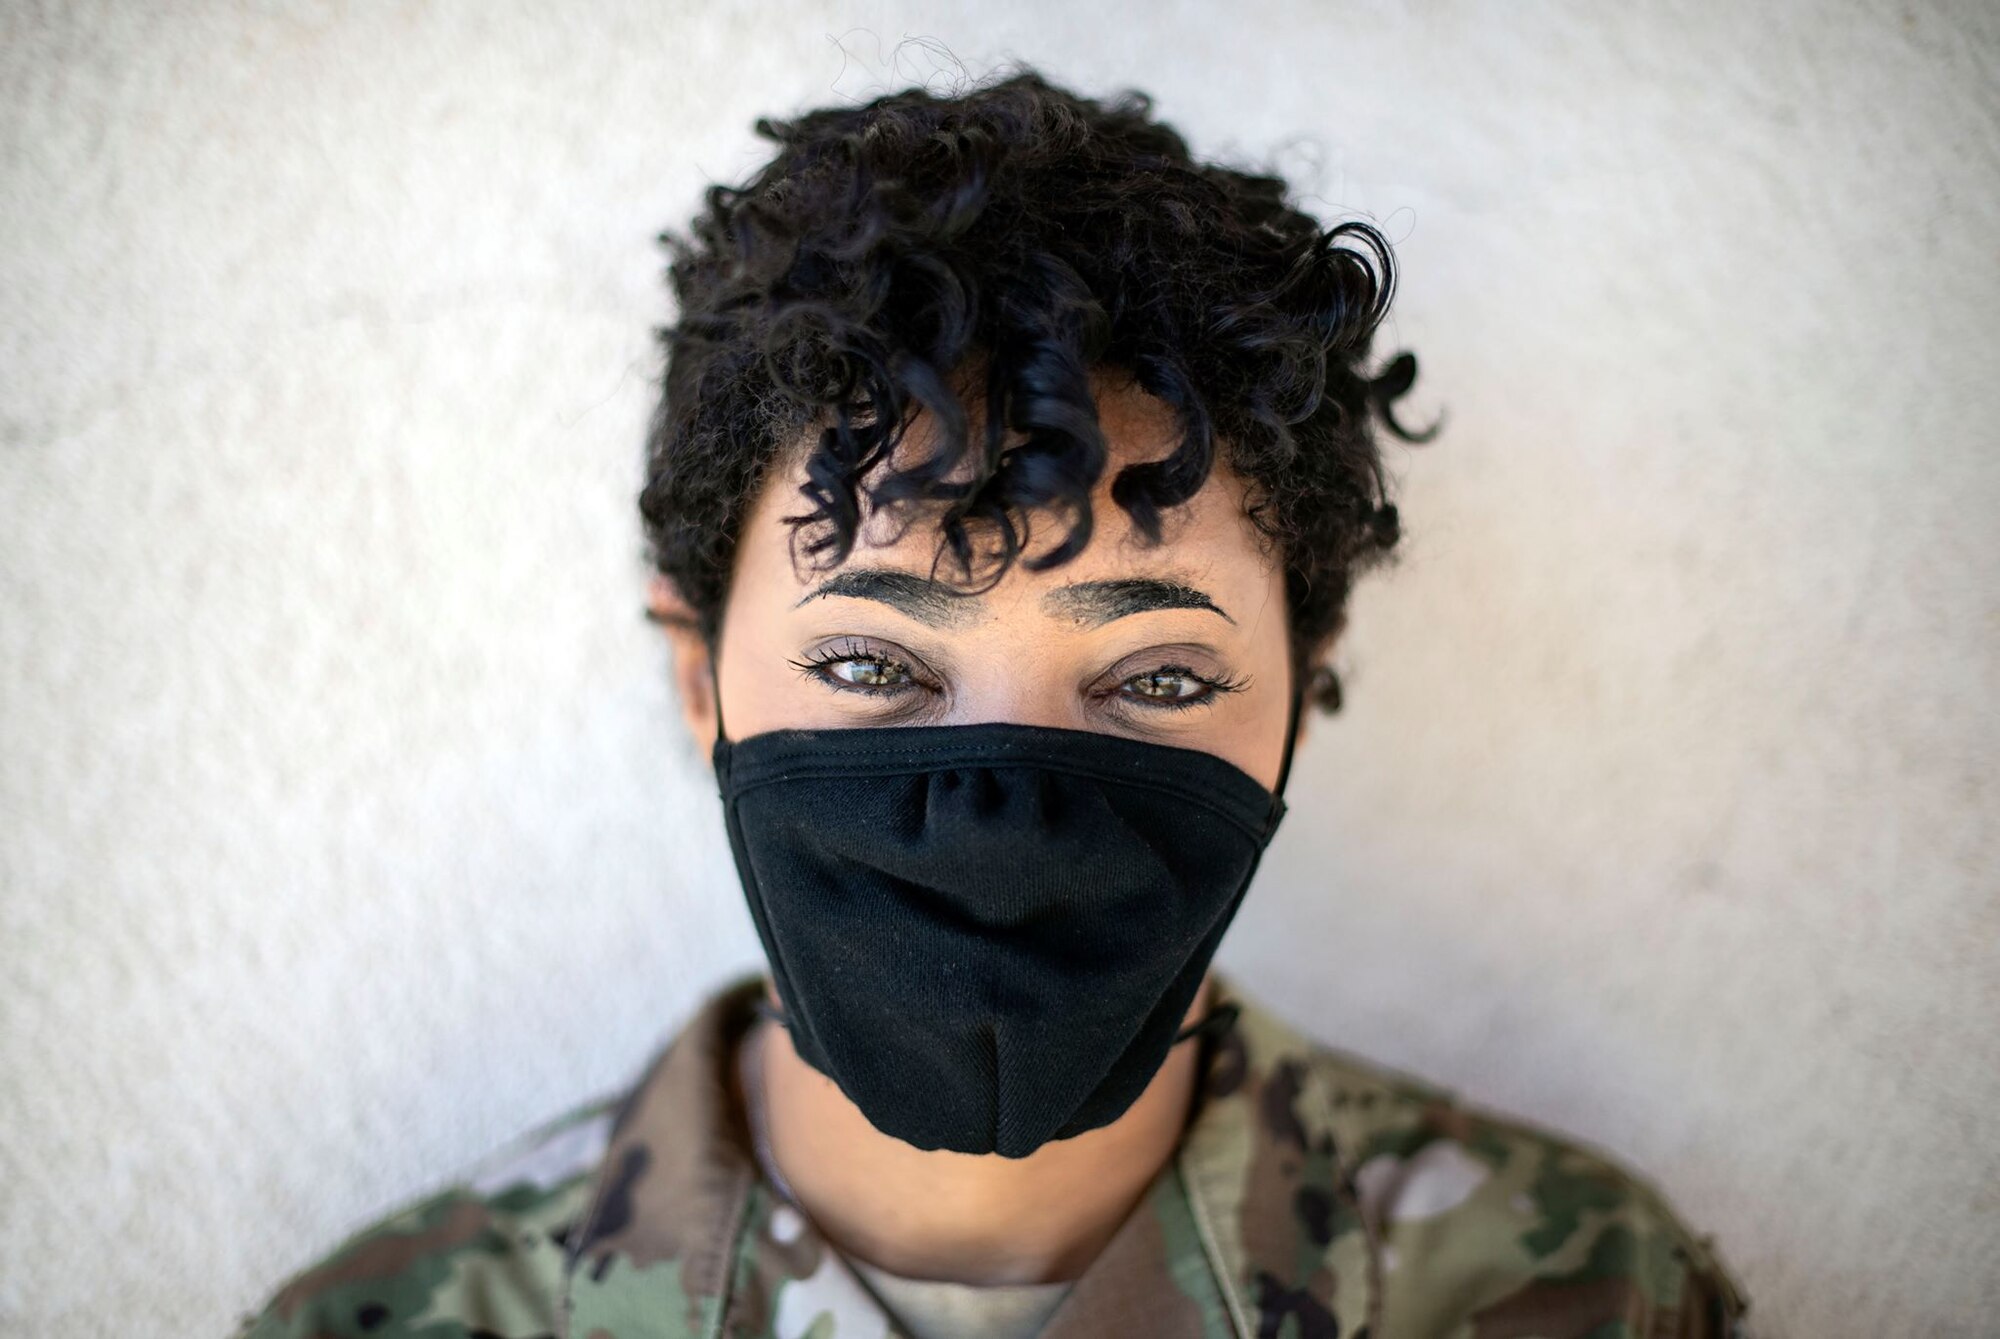 A female Airman in uniform looks directly at the camera with a black face mask on. It's sunny.